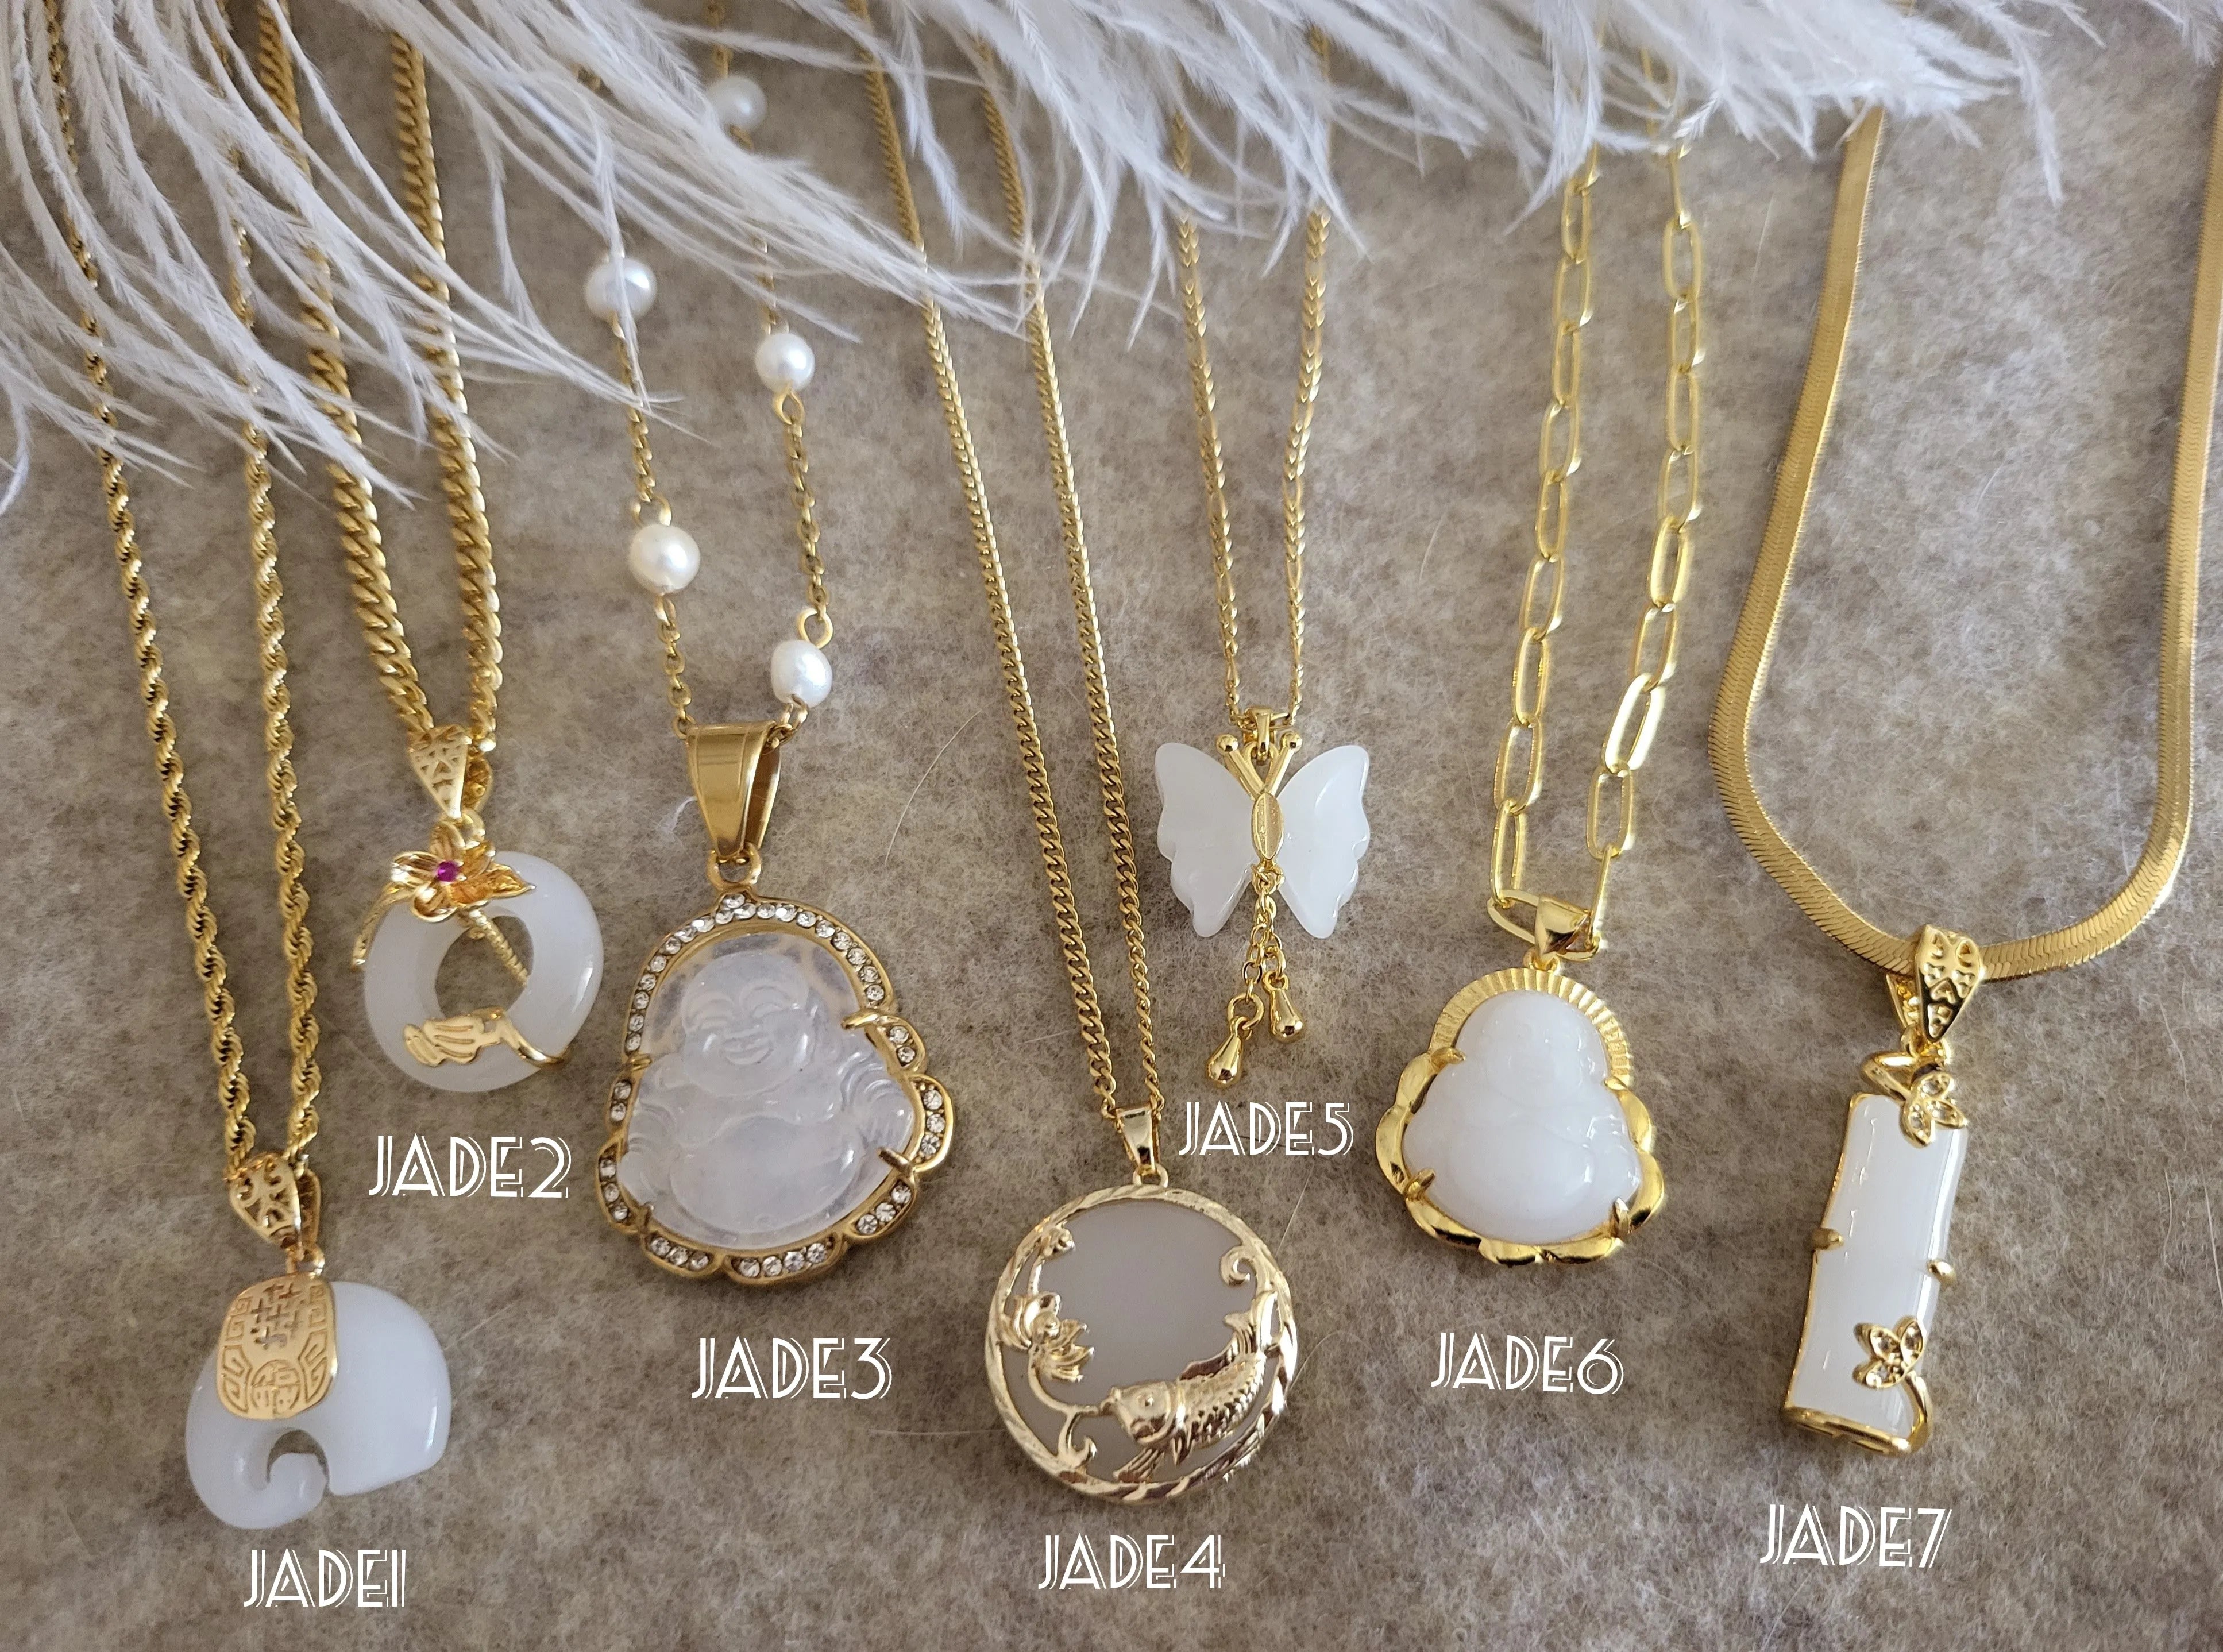 Gold Filled White Jade Necklace product images.